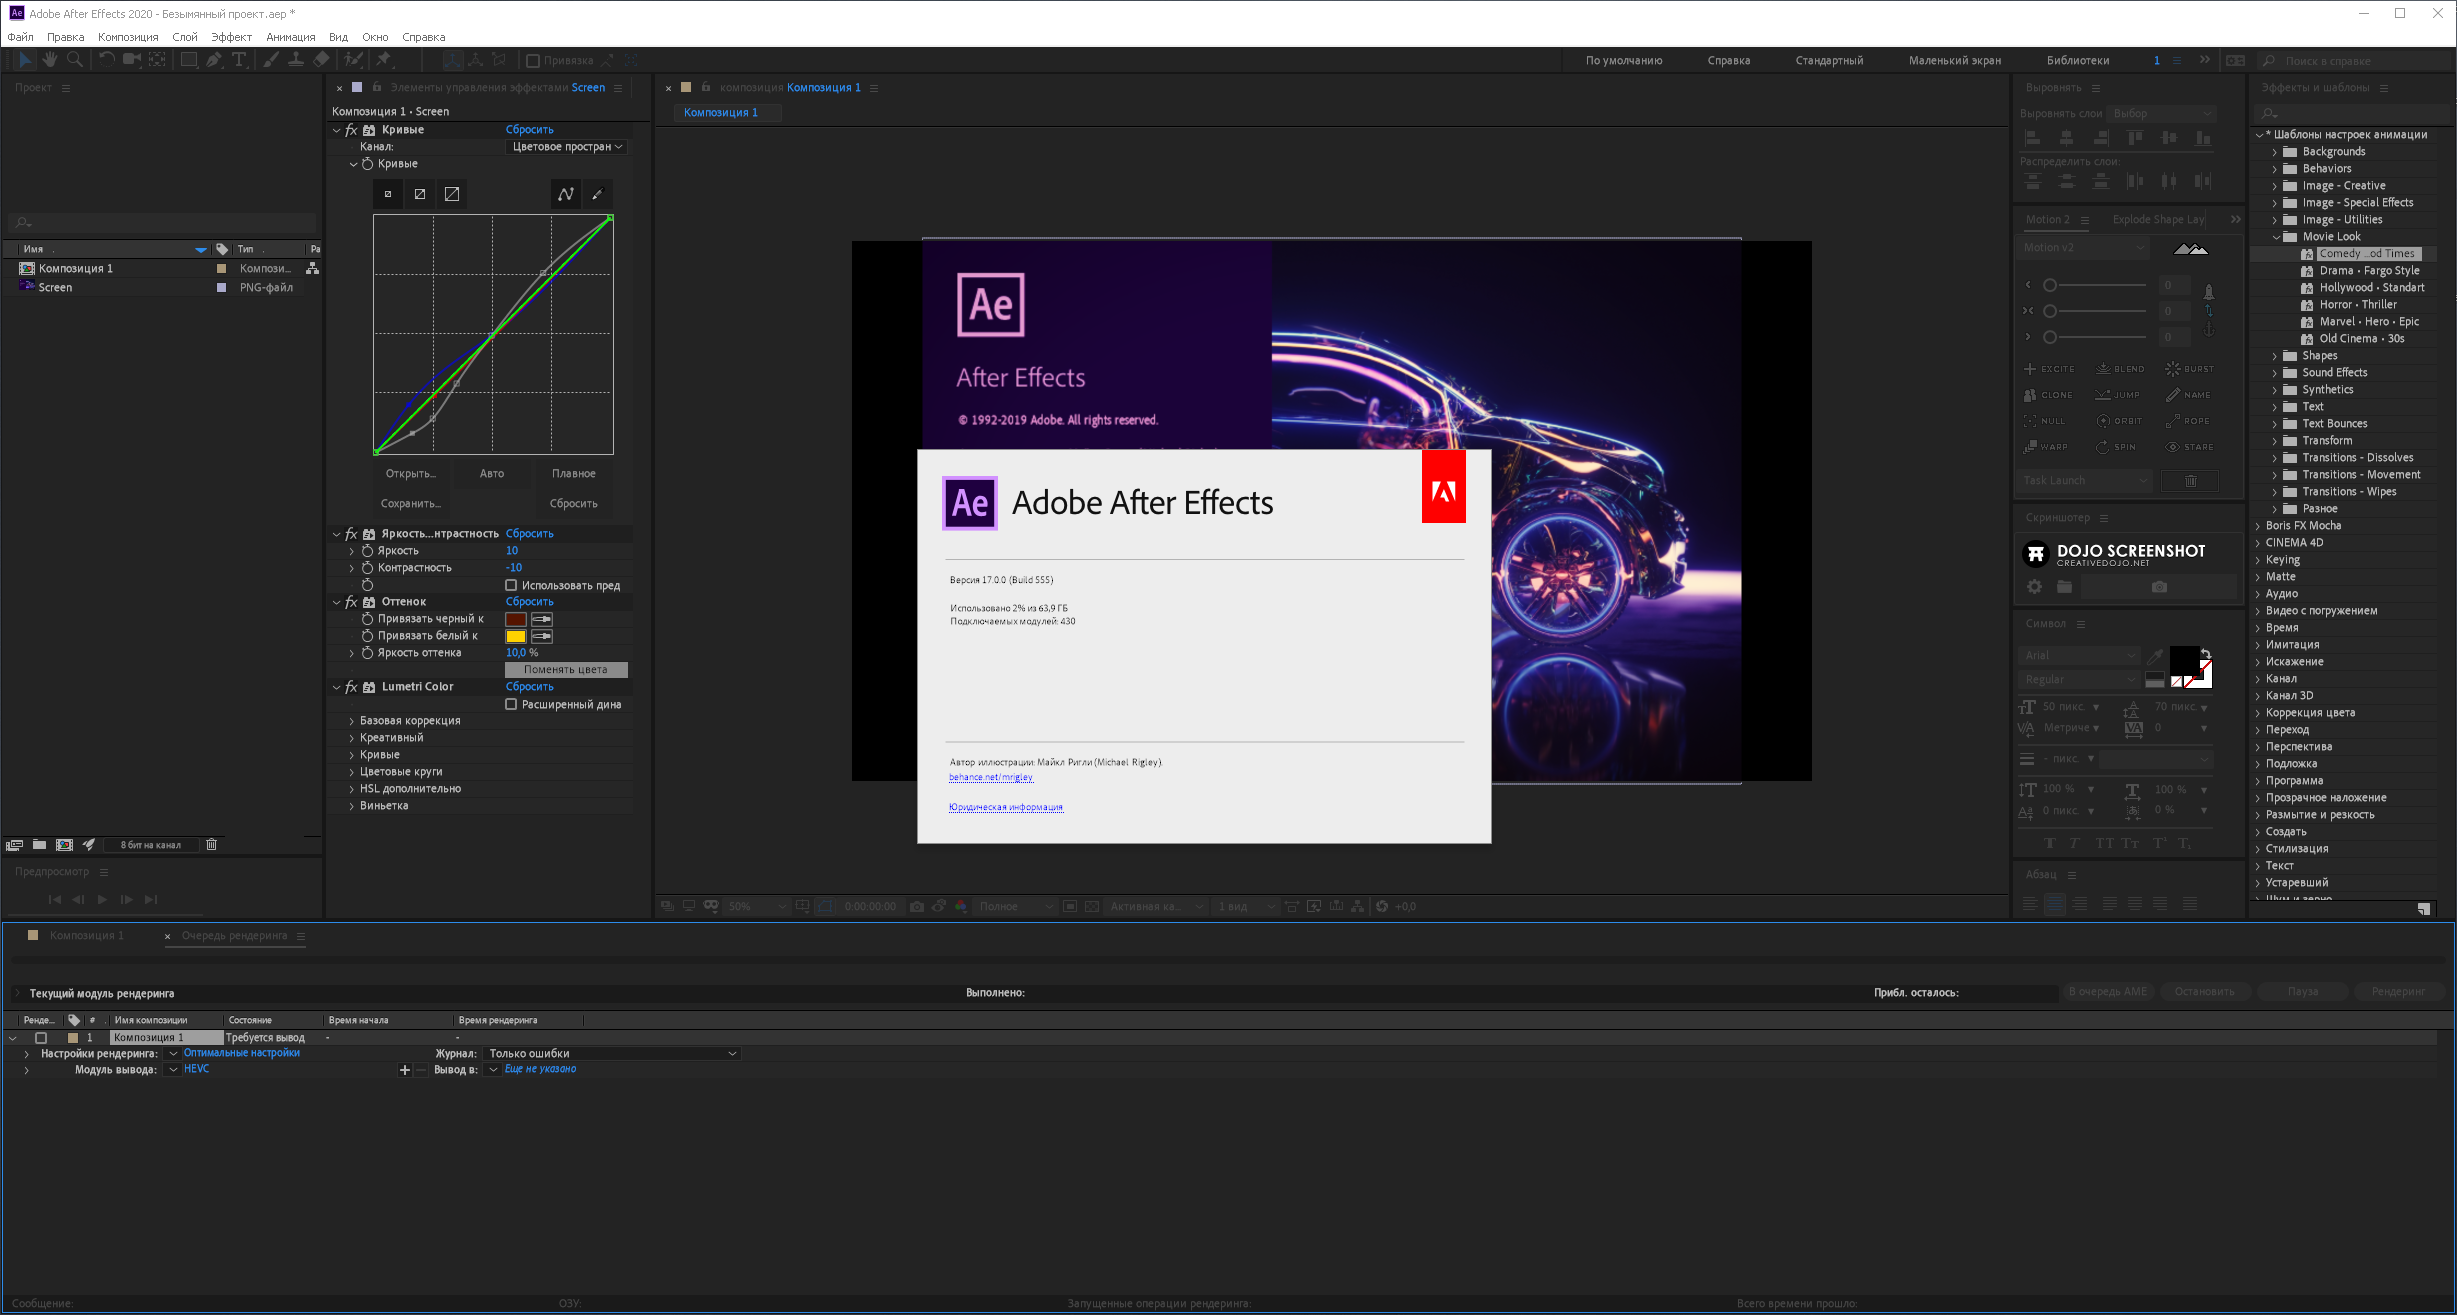 Adobe effects 2019. After Effects cc 2020. Adobe after Effects cc 2019. Adobe after Effects cc 2021. Интерфейс after Effects 2020.